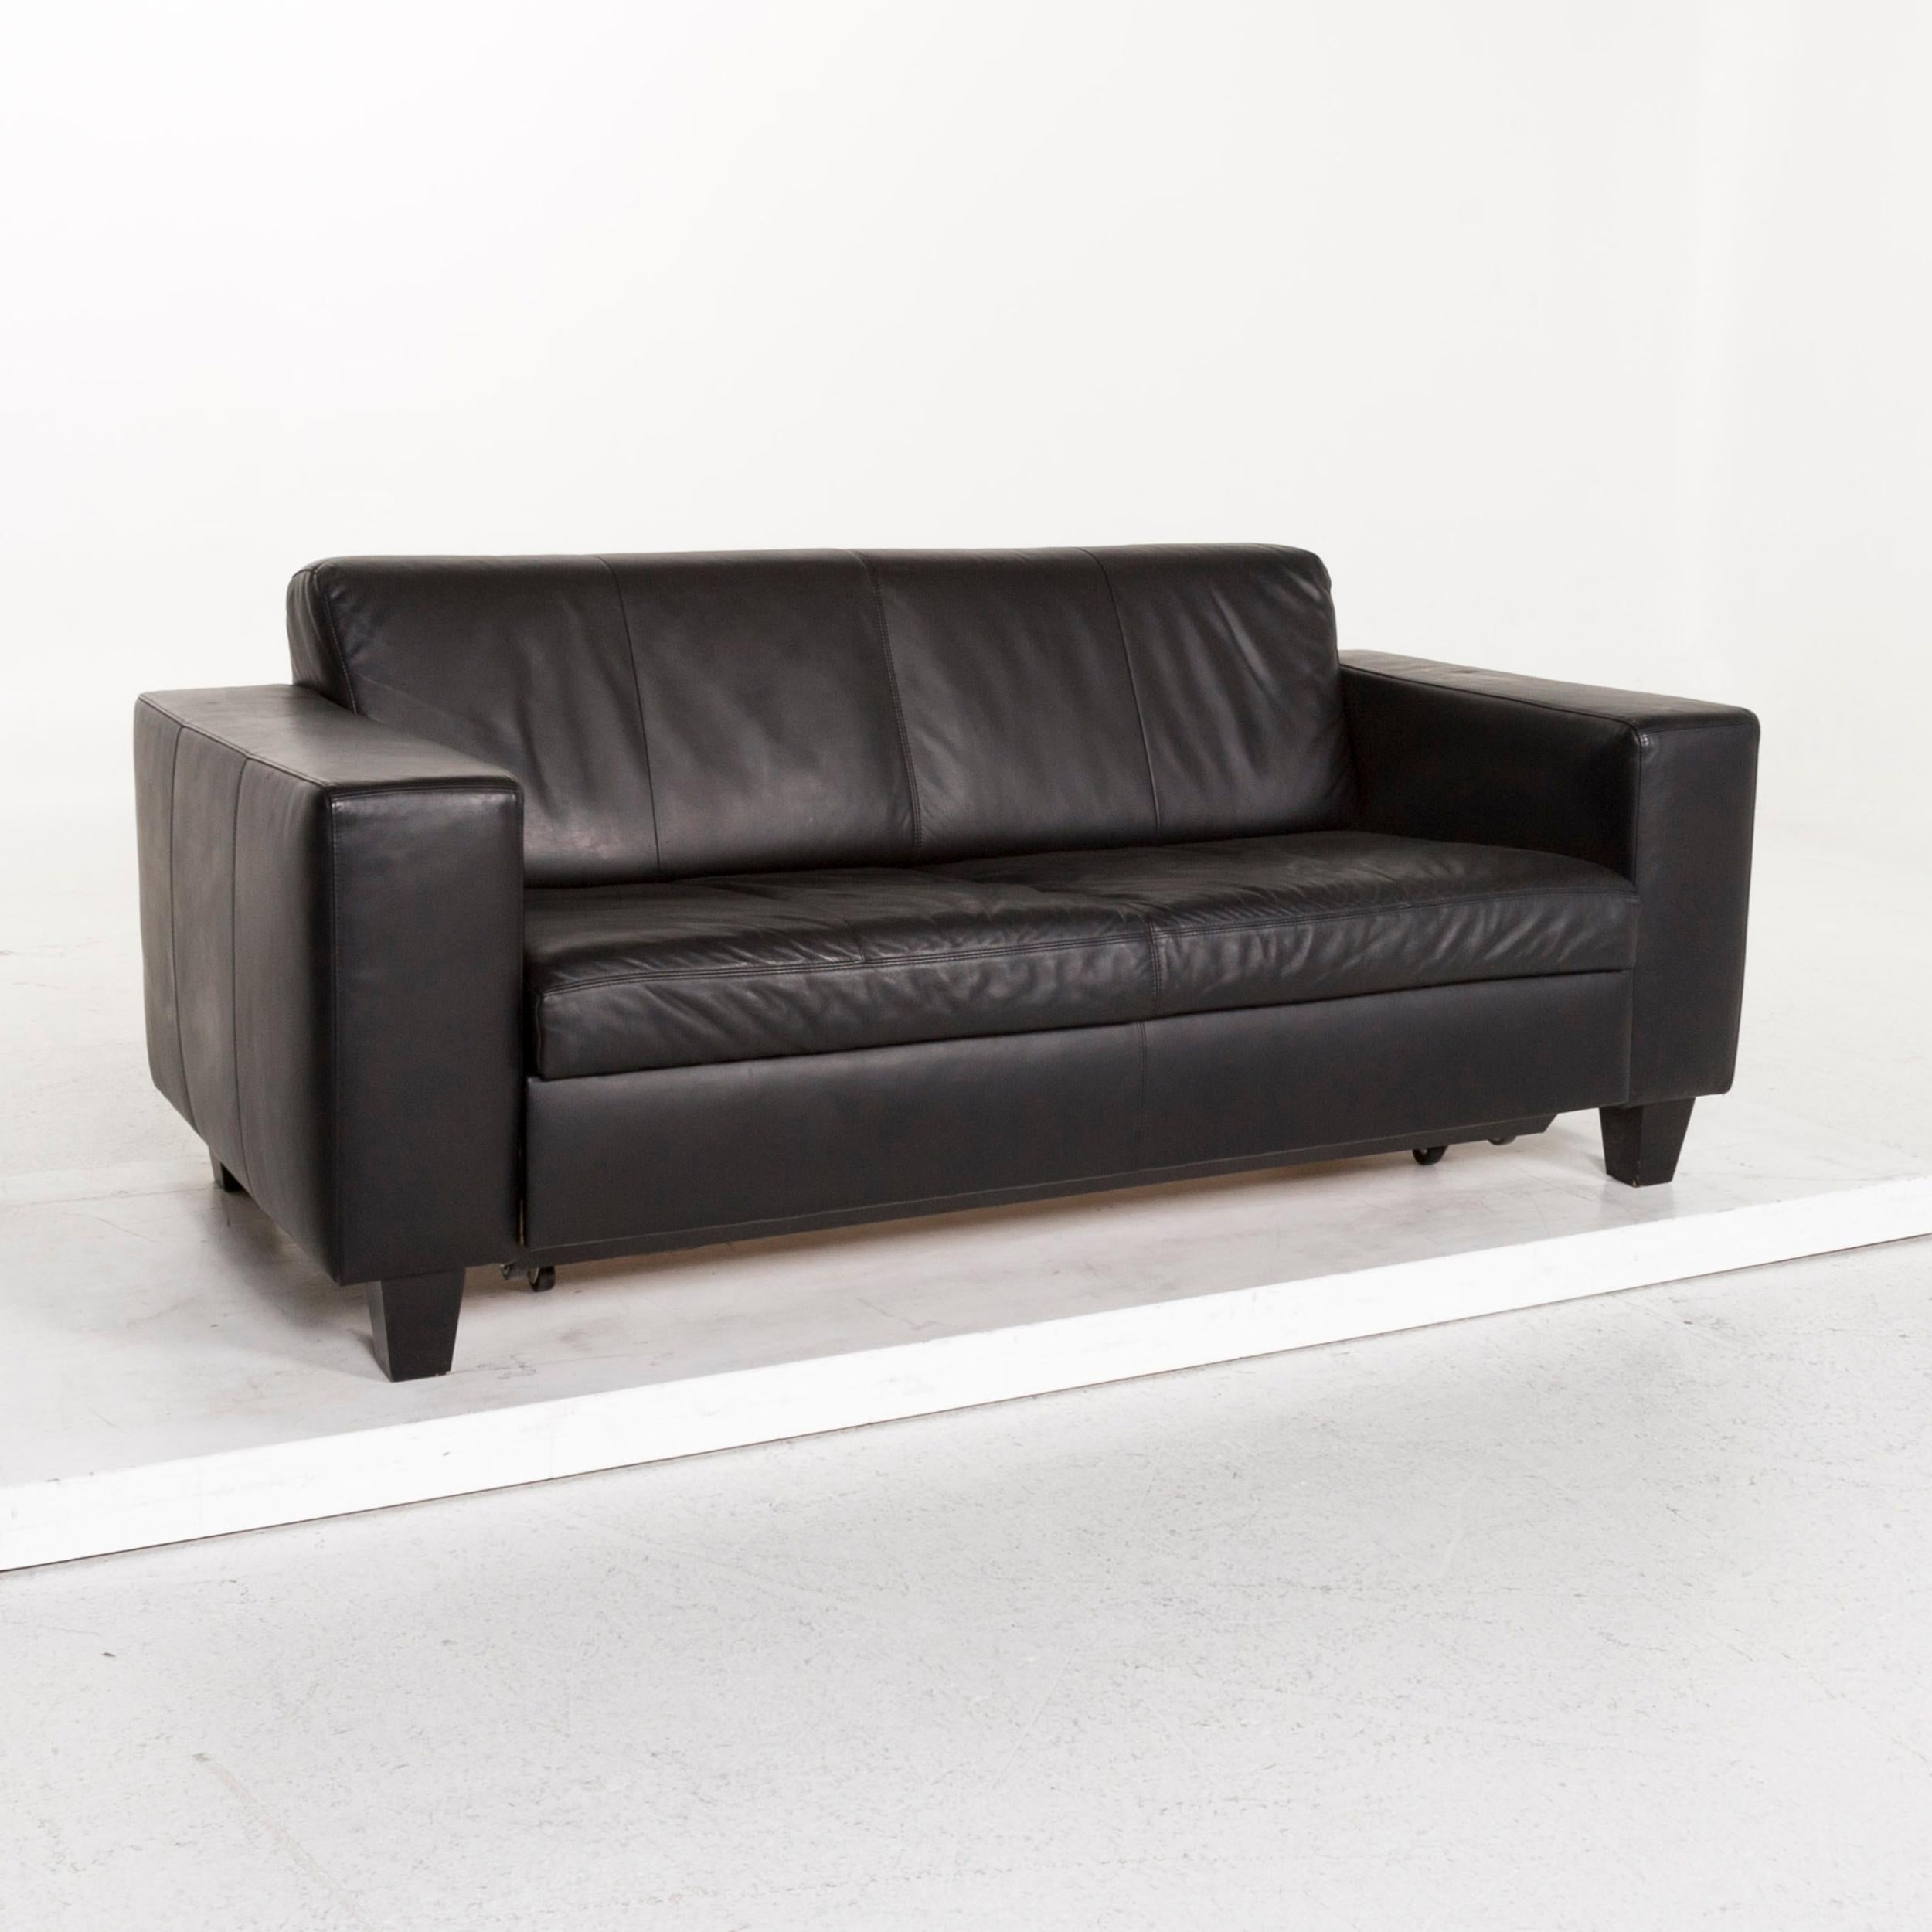 Machalke Leather Sofa Bed Black Two-Seat Sofa Sleep Function Couch 3